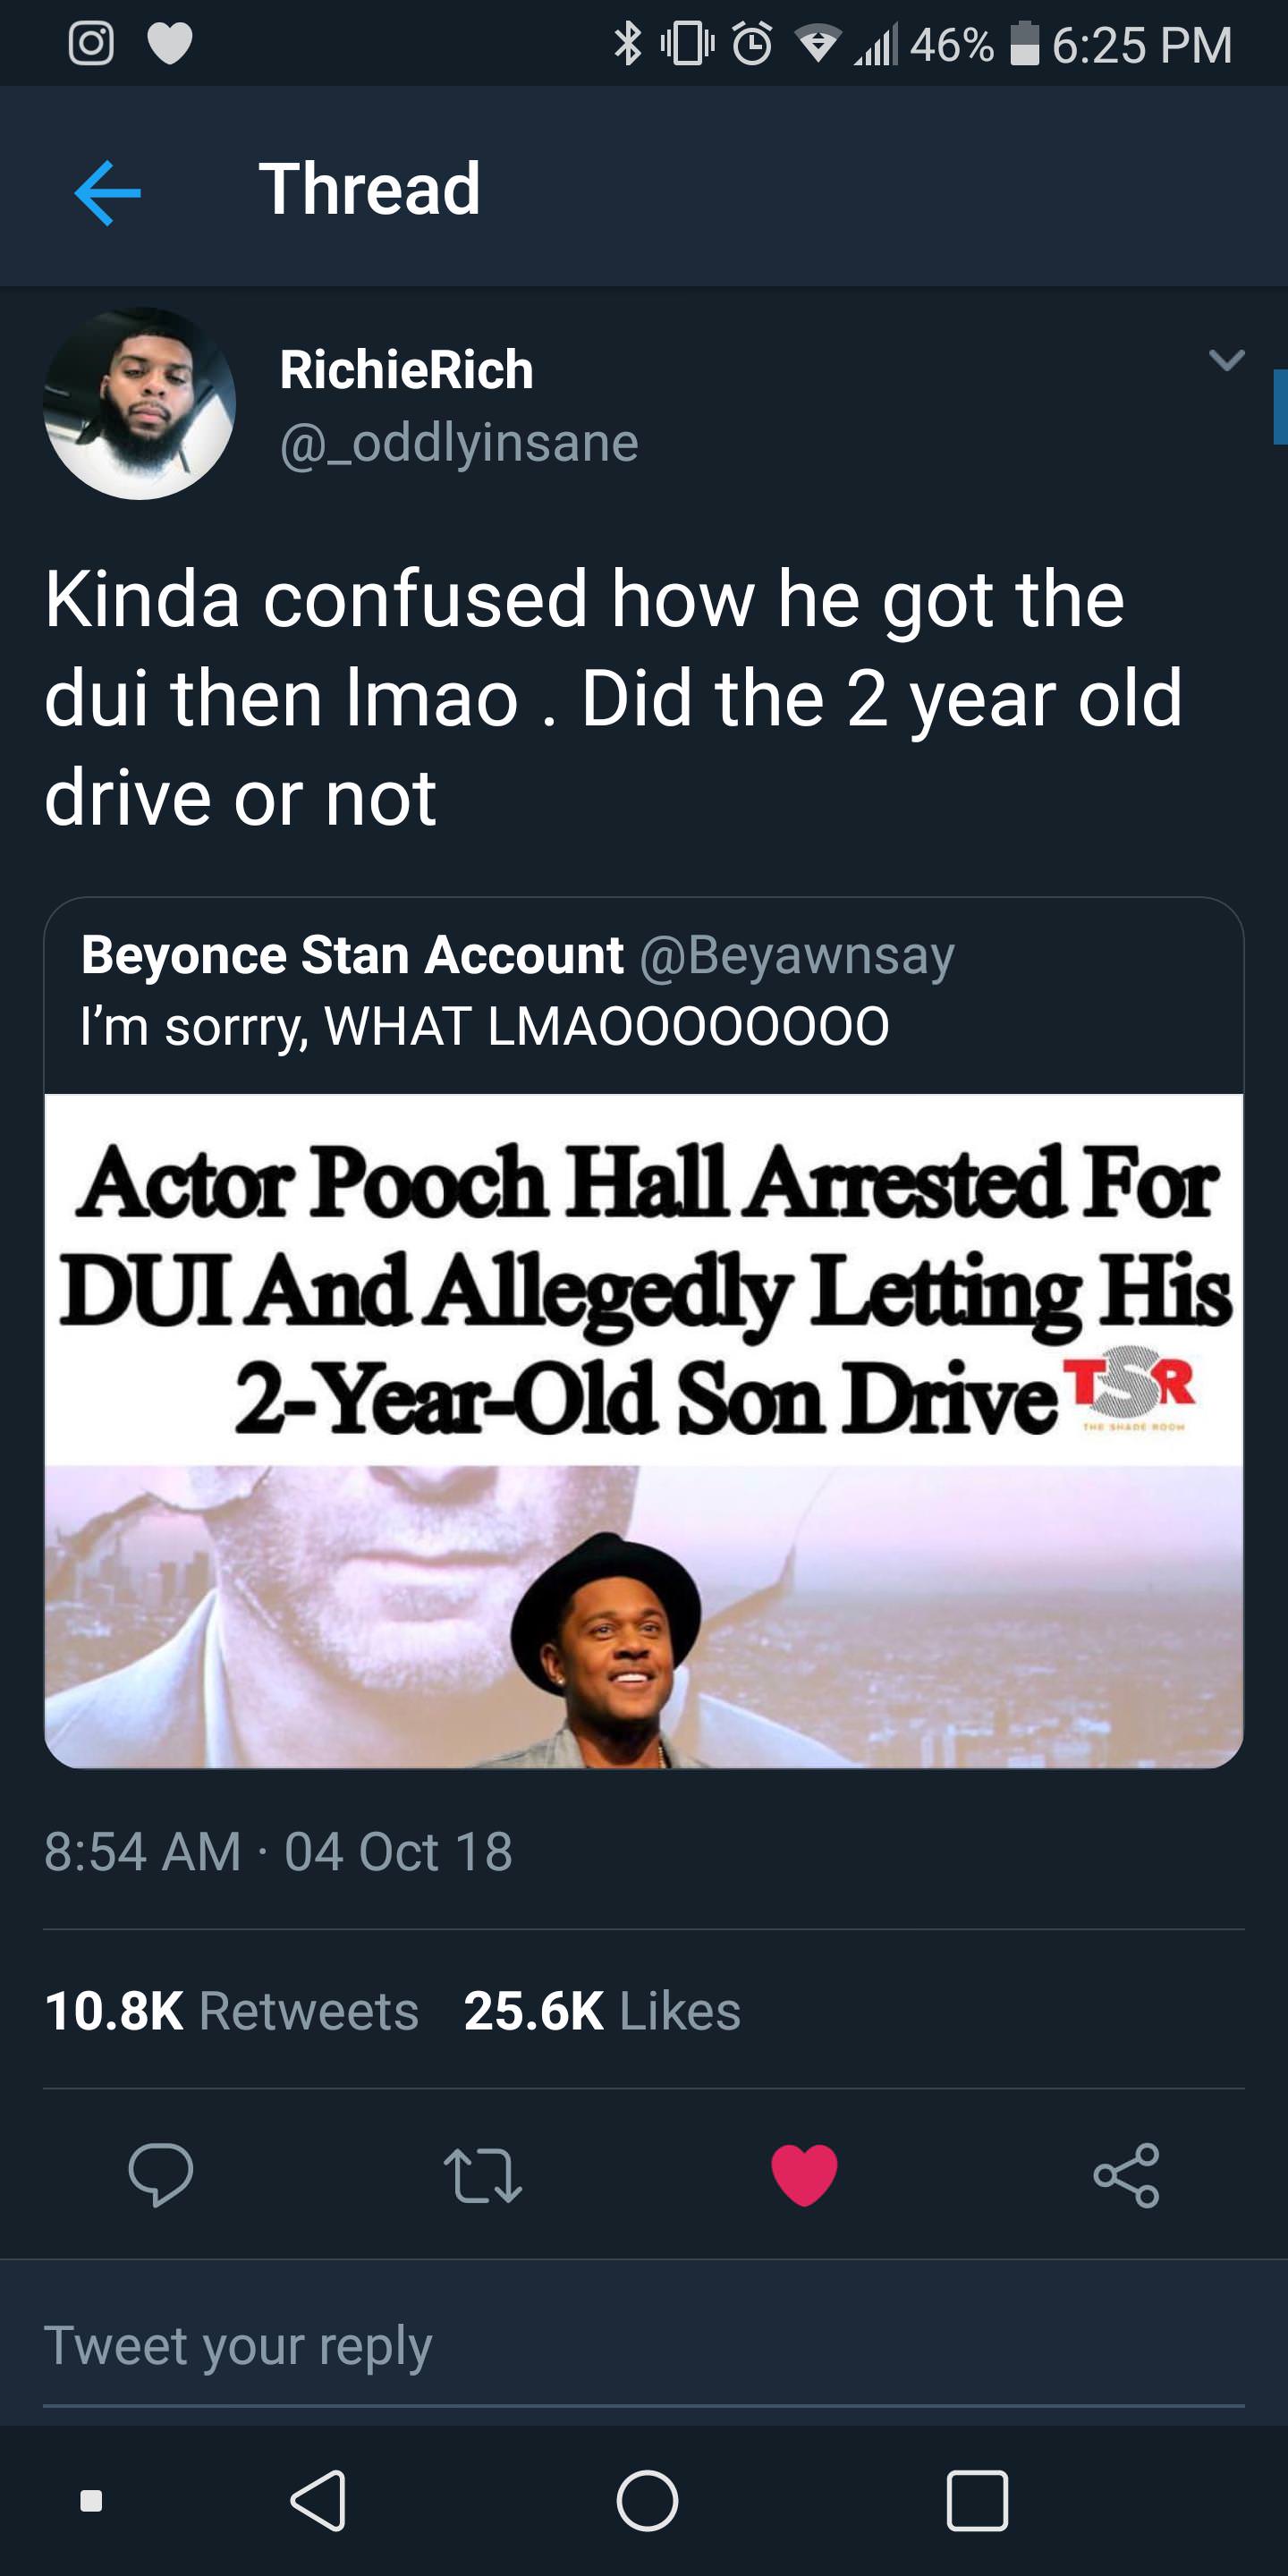 screenshot - 0" @ od 46% Thread Richie Rich Kinda confused how he got the dui then Imao . Did the 2 year old drive or not Beyonce Stan Account I'm sorrry, What LMAO0000000 Actor Pooch Hall Arrested For Dui And Allegedly Letting His 2YearOld Son Drive Tsr 